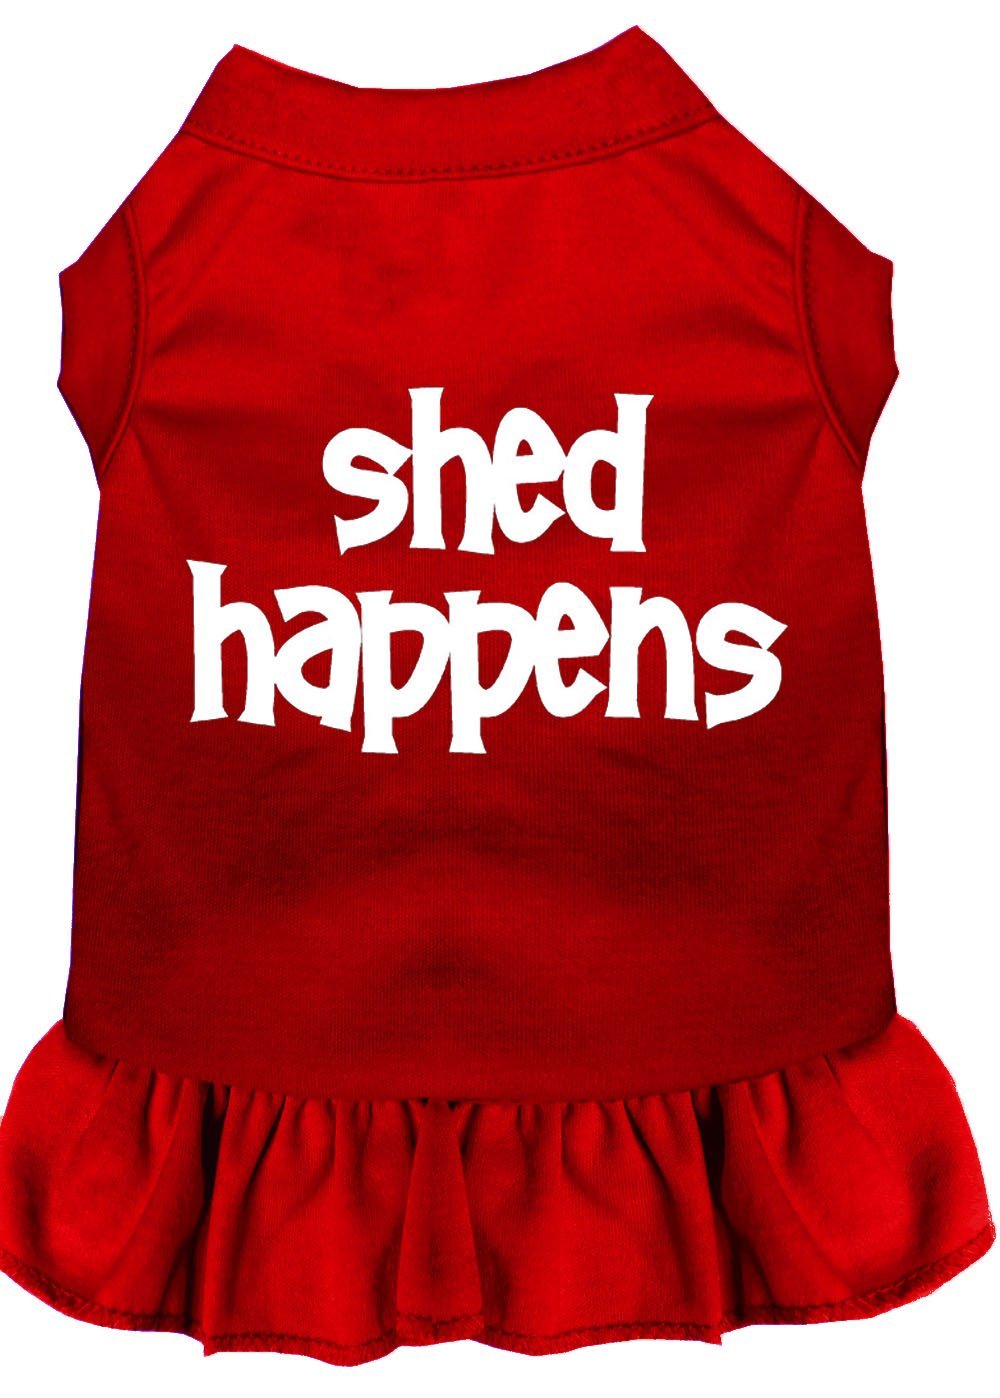 [Australia] - Mirage Pet Products 58-16 MDRD Shed Happens Screen Print Dress, Medium, Red 